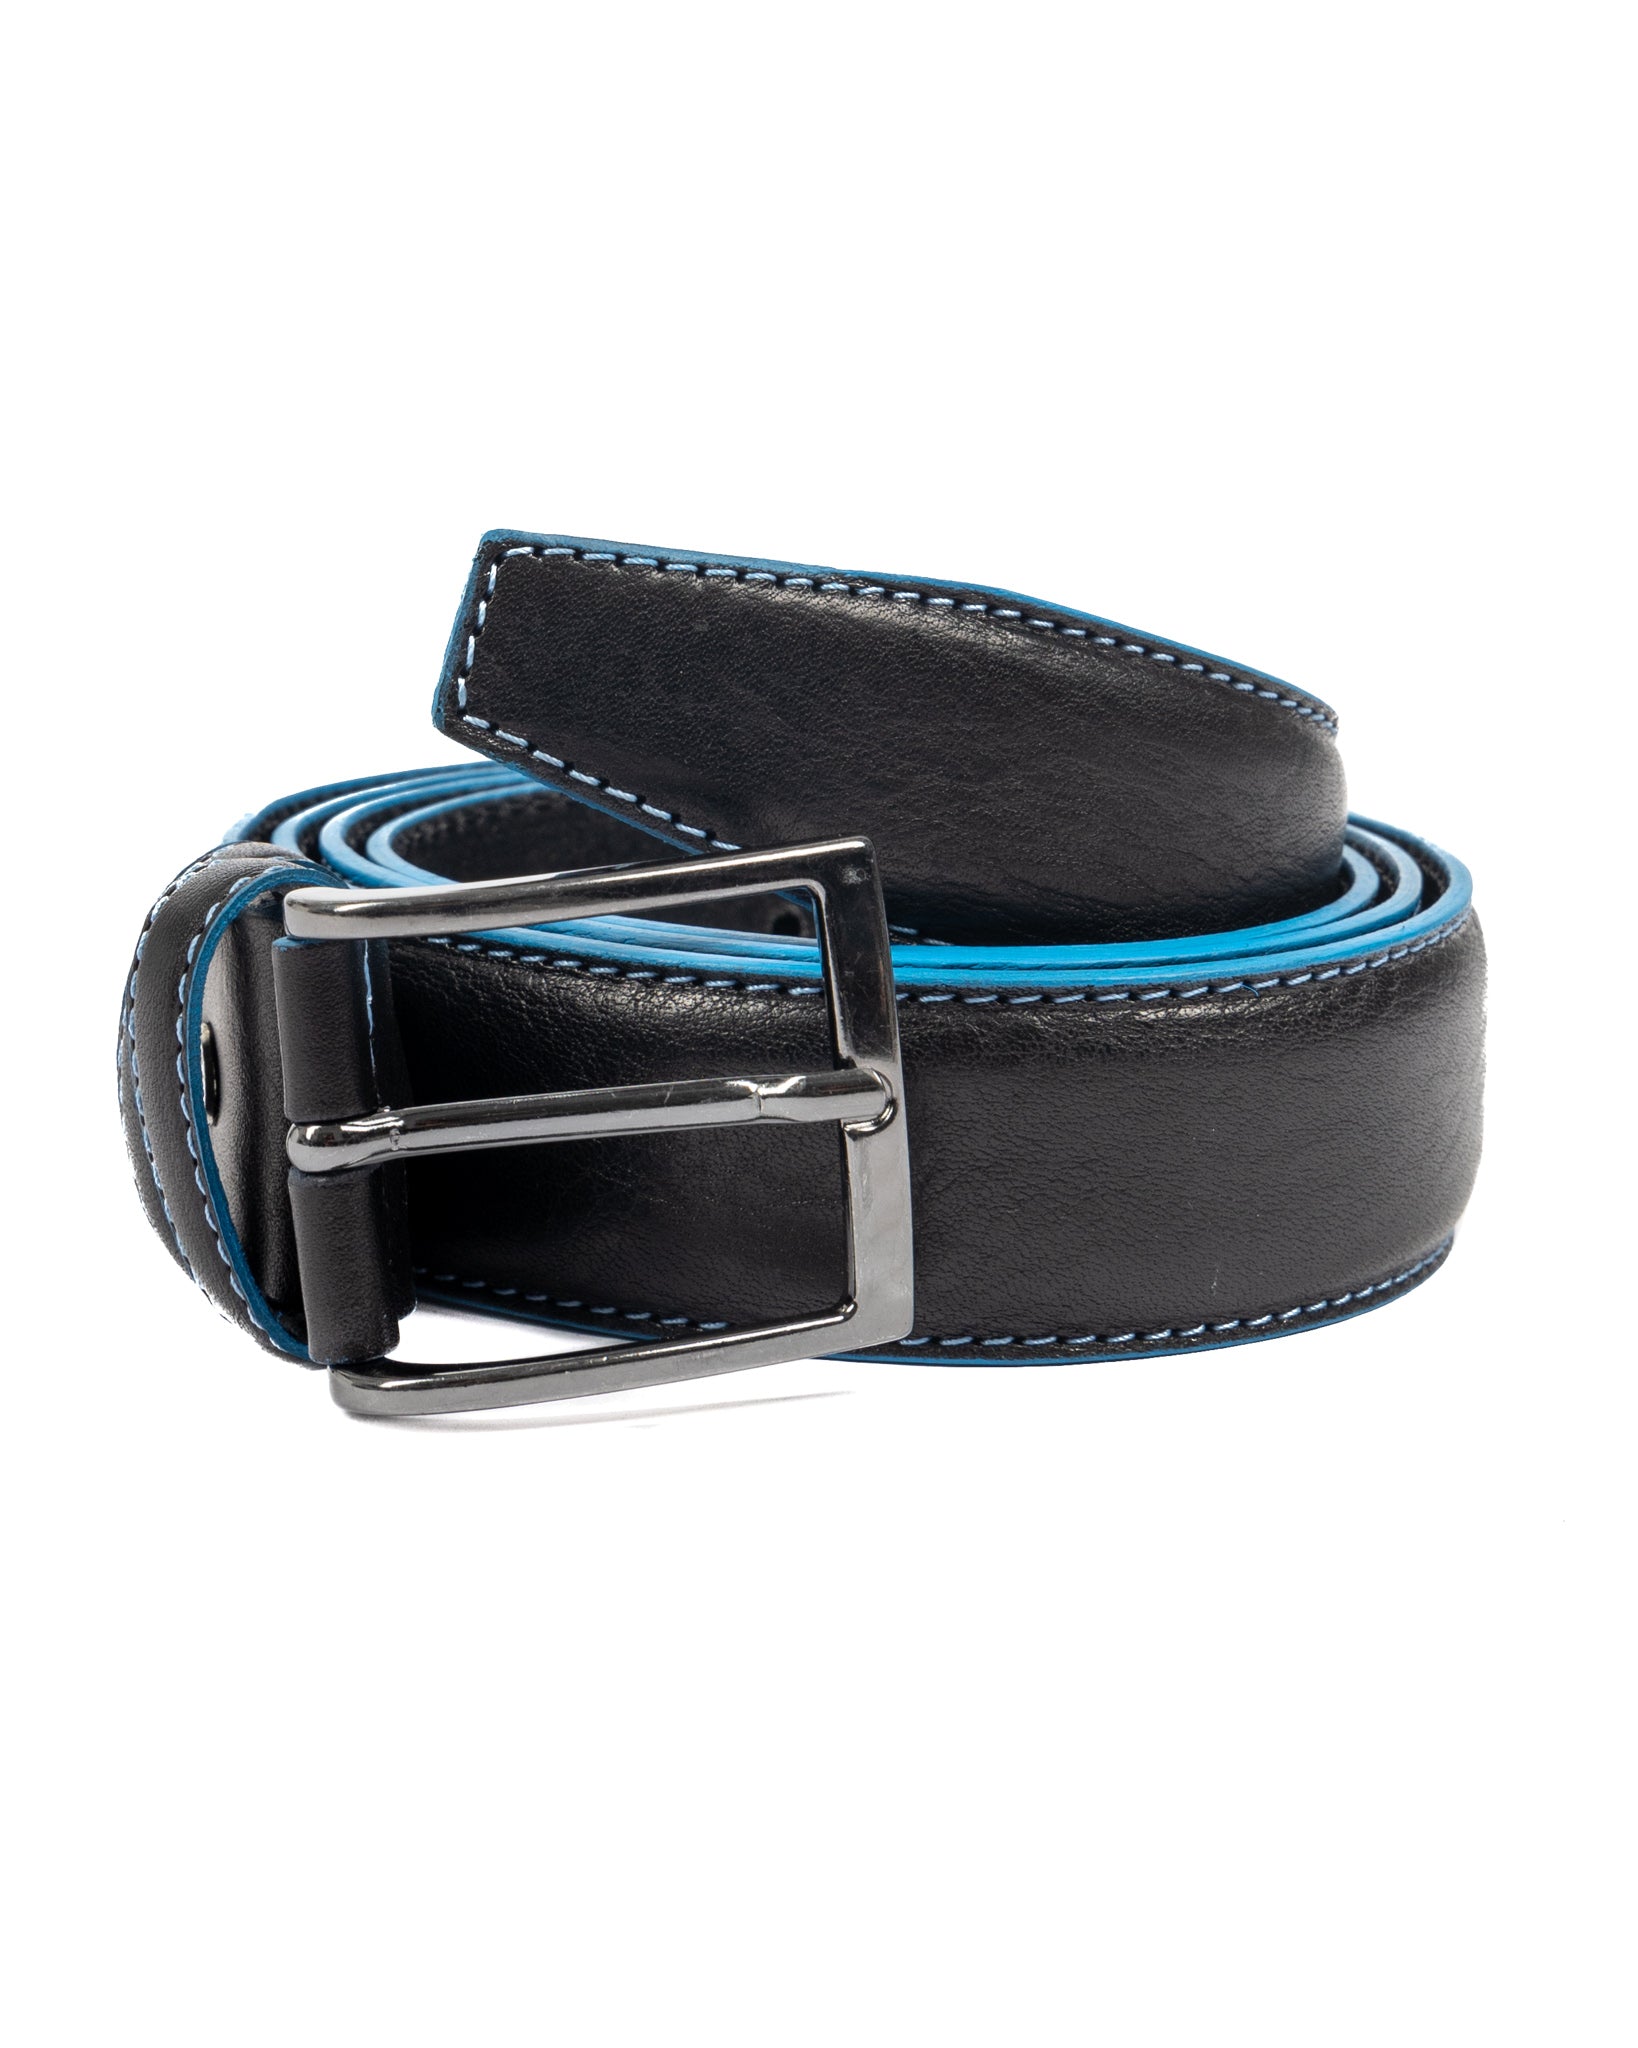 Pienza - black leather belt with contrasting stitching